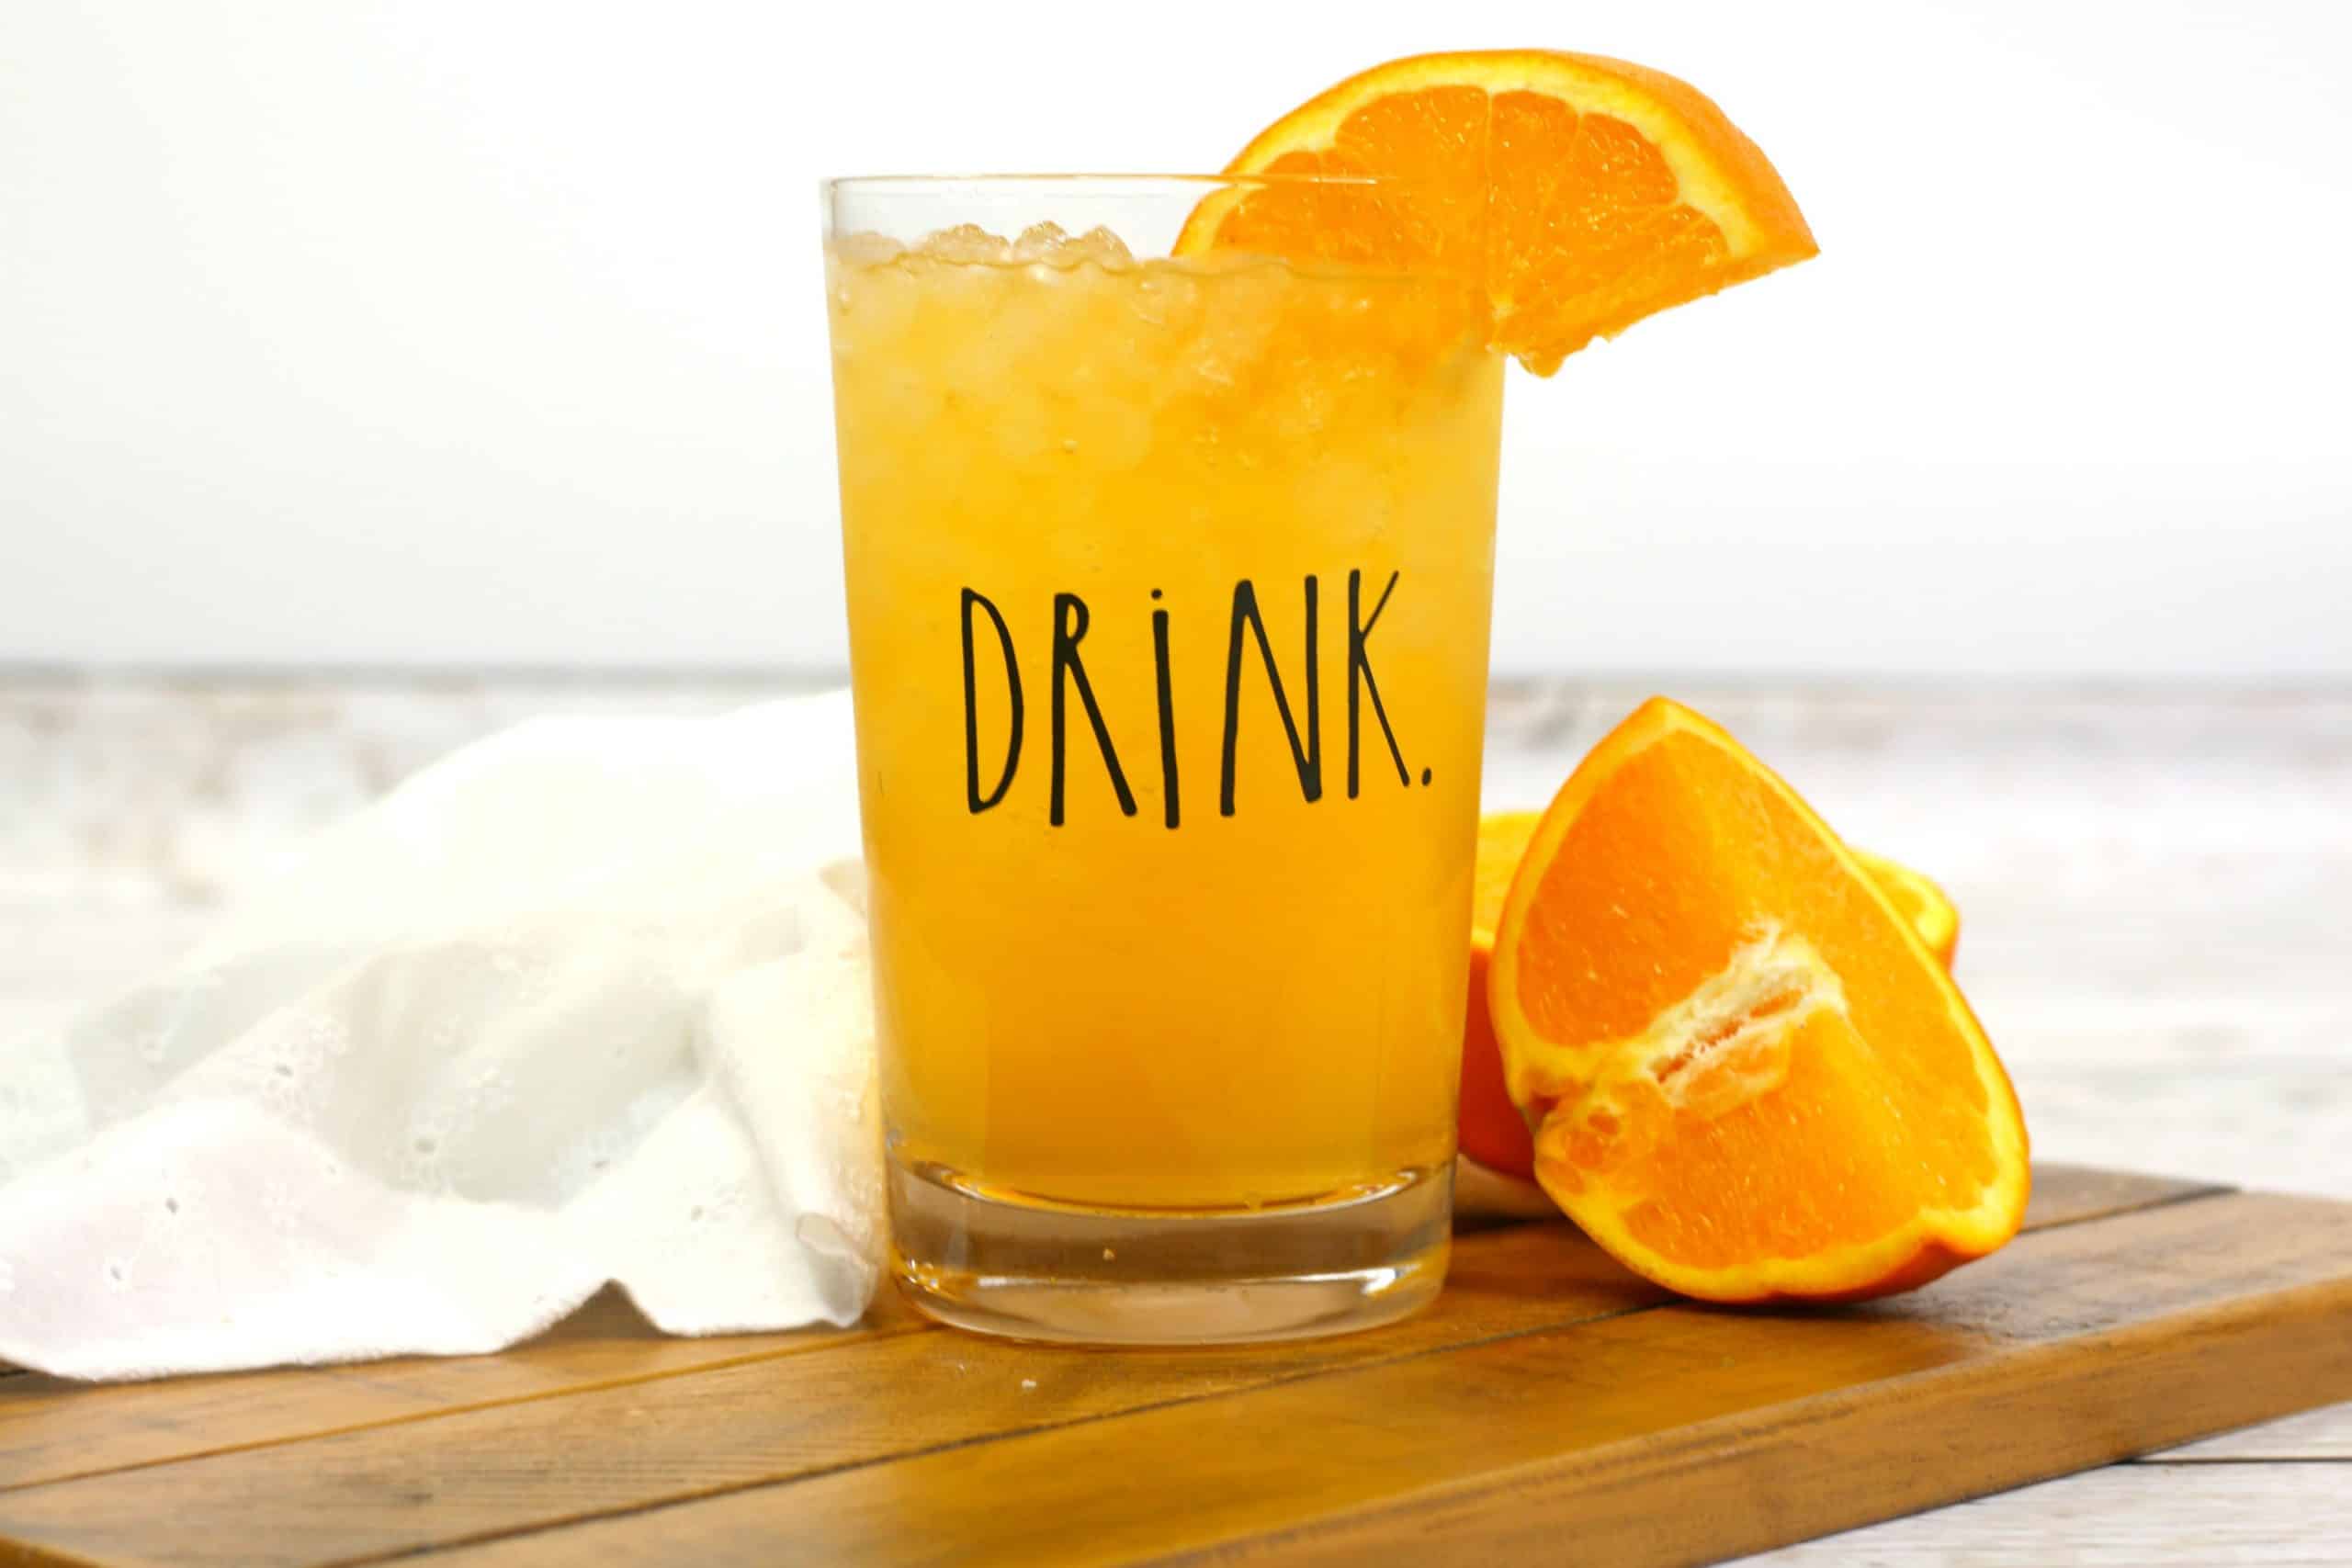 energy drink in a clear glass with a drink label on it, with a slice of orange in the drink and oranges next to it.